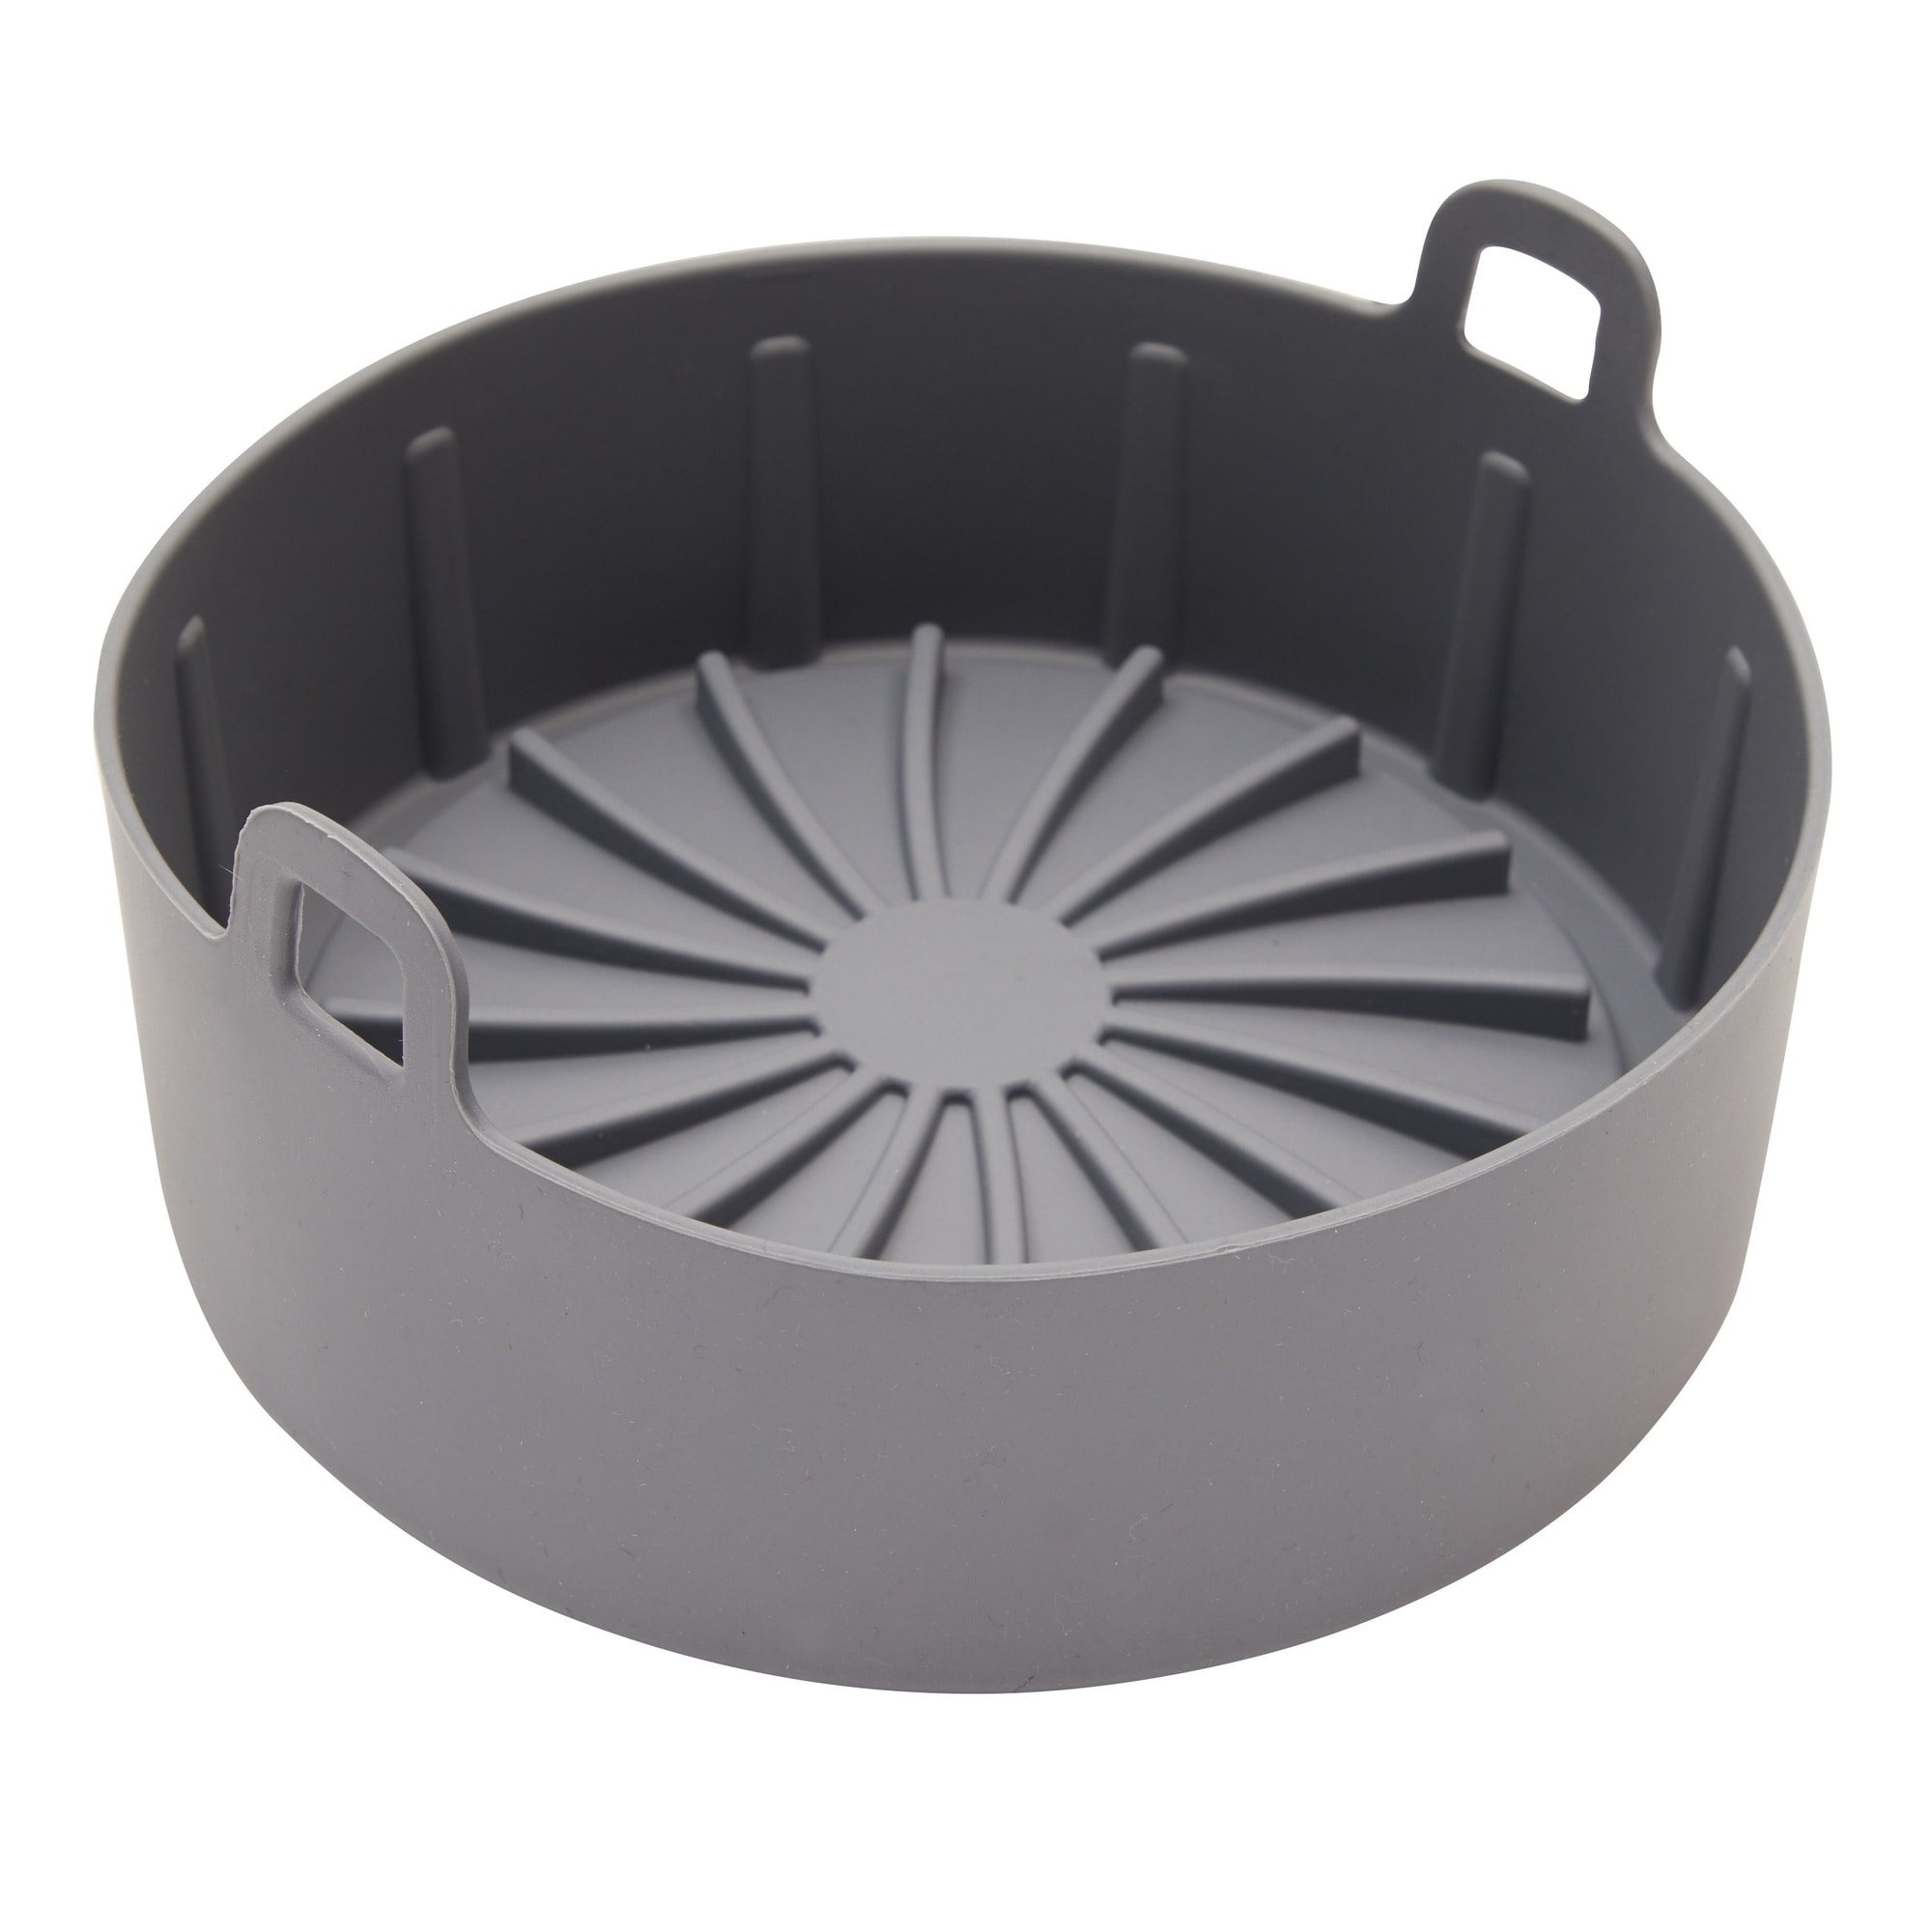 https://ak1.ostkcdn.com/images/products/is/images/direct/7d0b348483cf053ff90b1d64f2e5924afe4f4927/4-Piece-Set-Silicone-Pot-Basket-with-Handles%2C-Brush%2C-Tongs-for-Air-Fryer-Liner-%286.3-In%2C-Gray%29.jpg